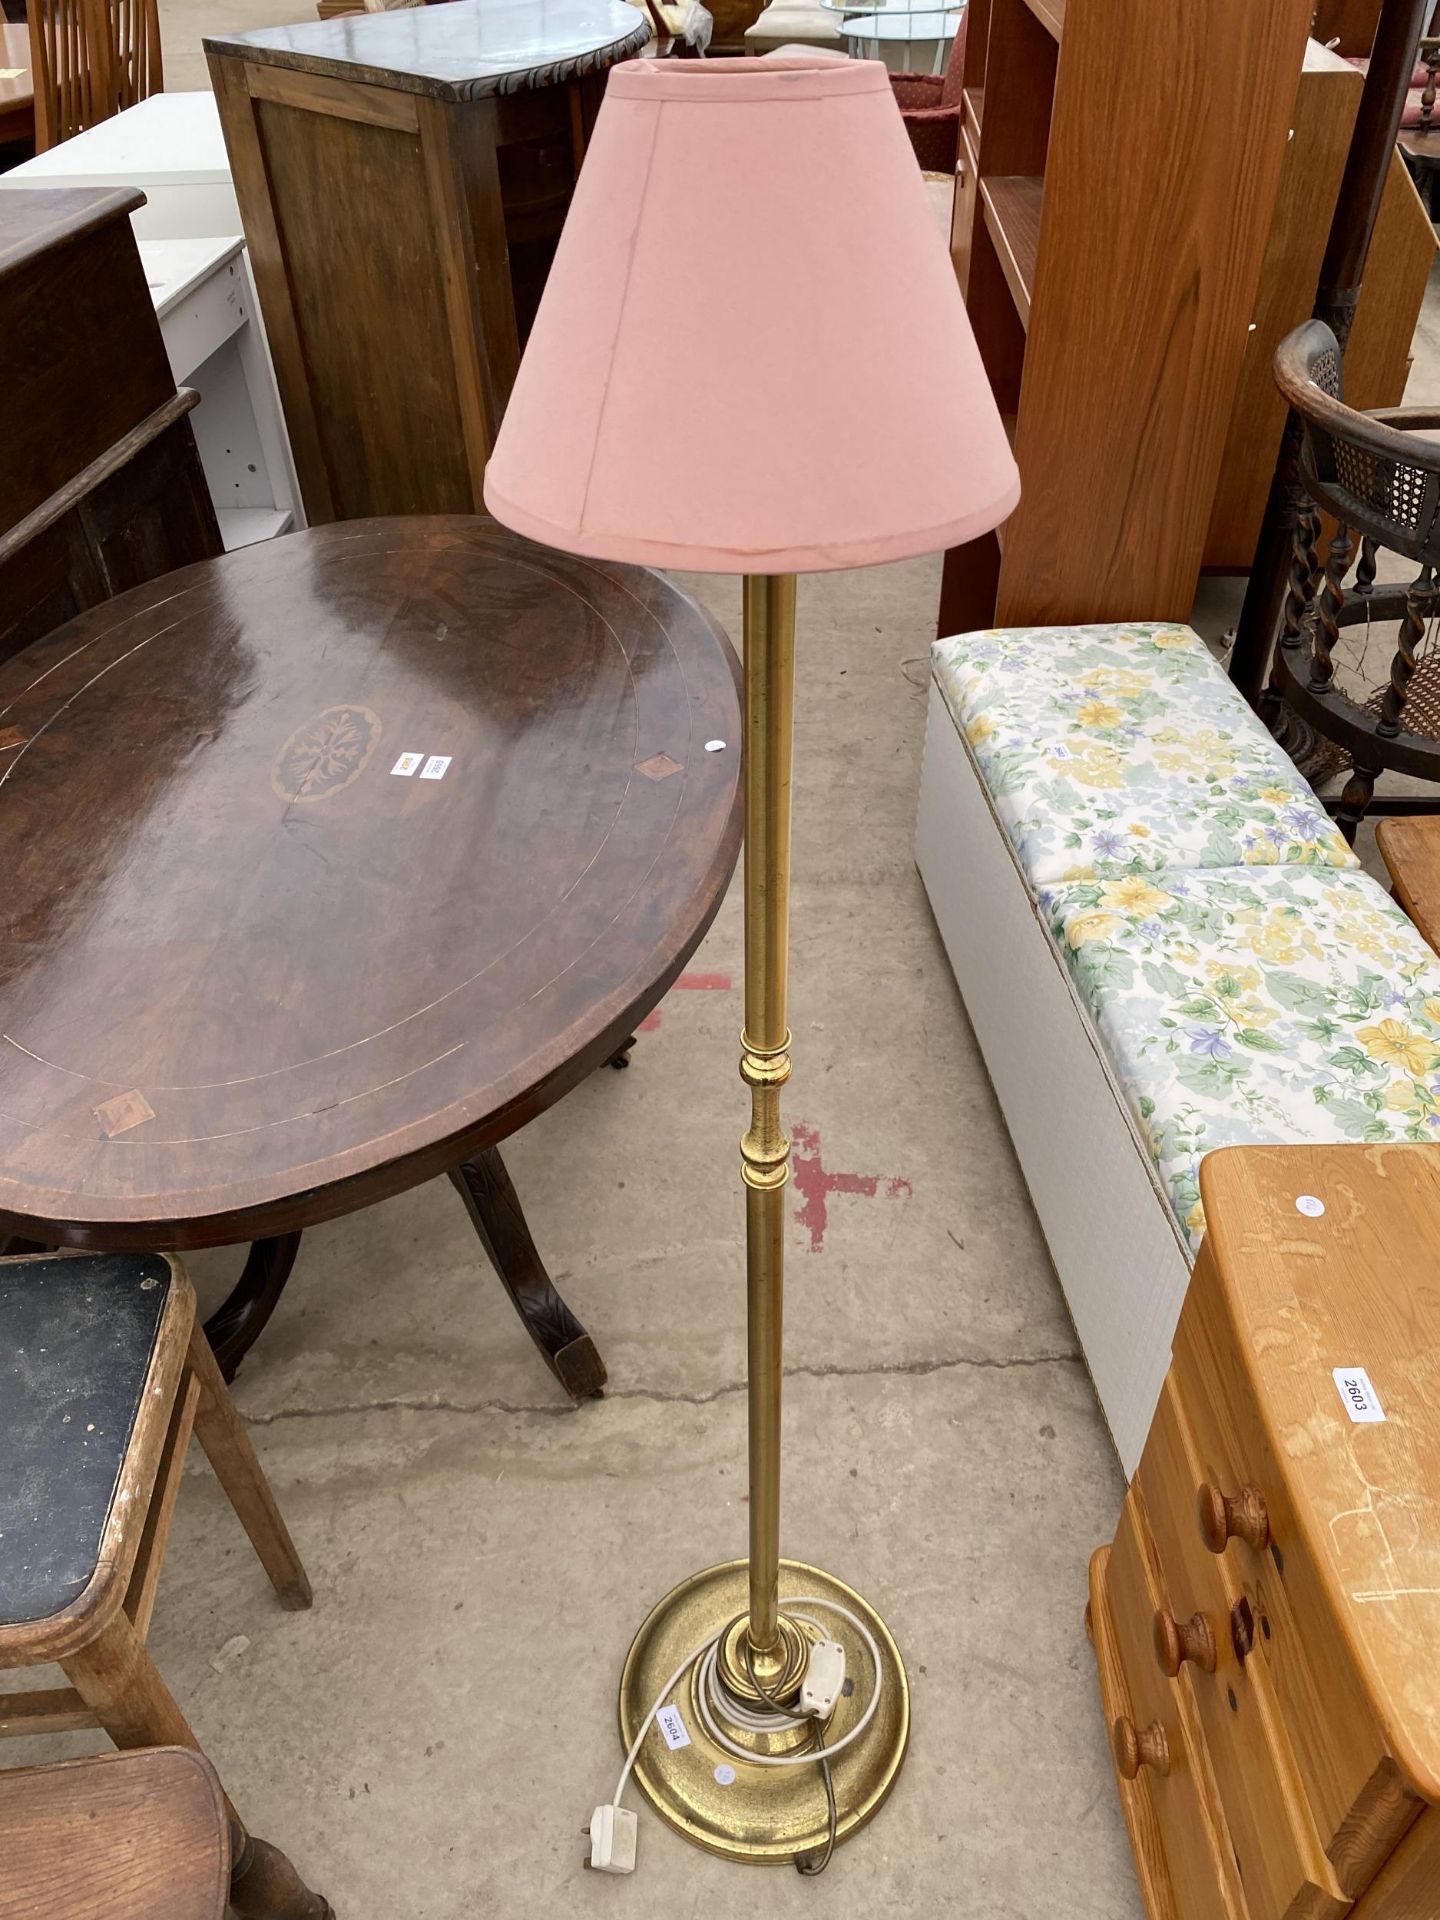 A SMALL BRASS STANDARD LAMP COMPLETE WITH SHADE